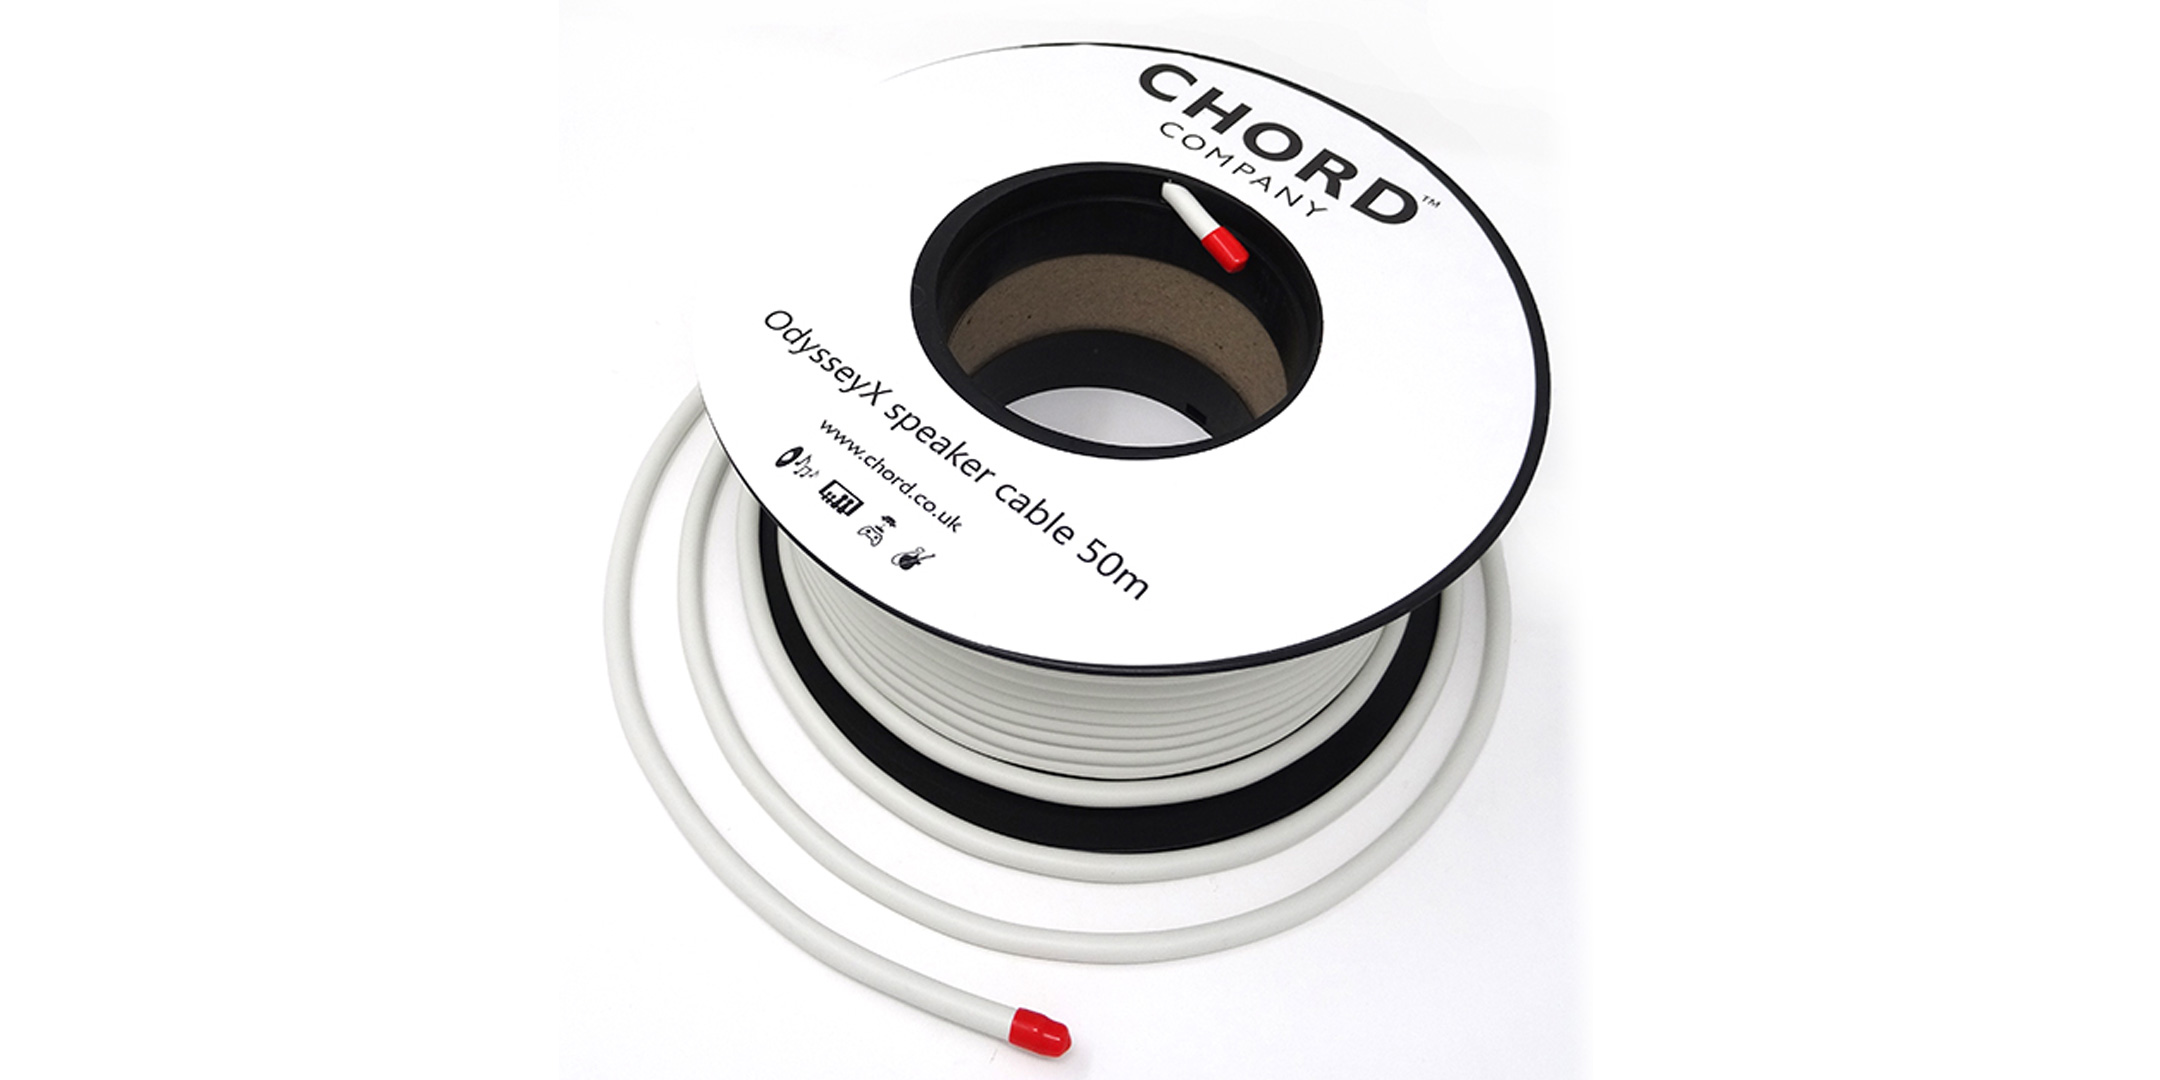 Pic showing a roll of Chord Odyssey speaker cable on a white background